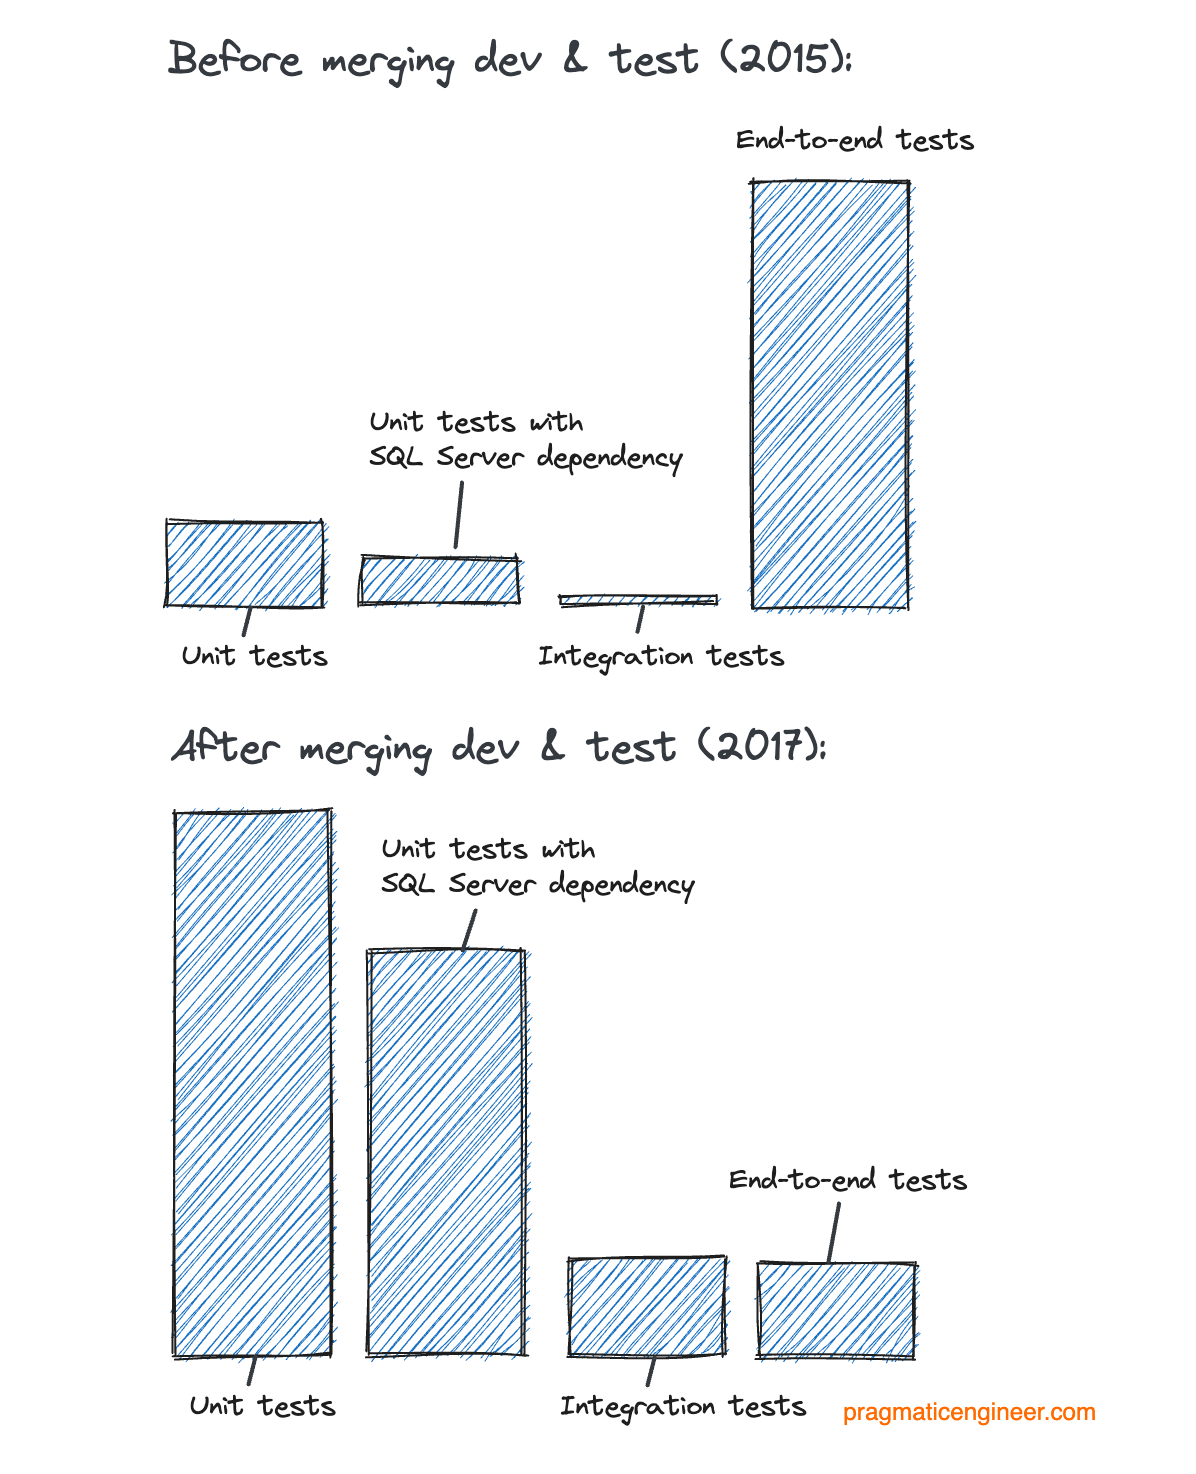 The change in the number and type of tests the Visual Studio Team Services experienced after merging the dev and the test teams. Before the merge: end-to-end tests dominated, but unit and integration tests were rare. This flipped after the merge. Data source: Microsoft Dev Blogs